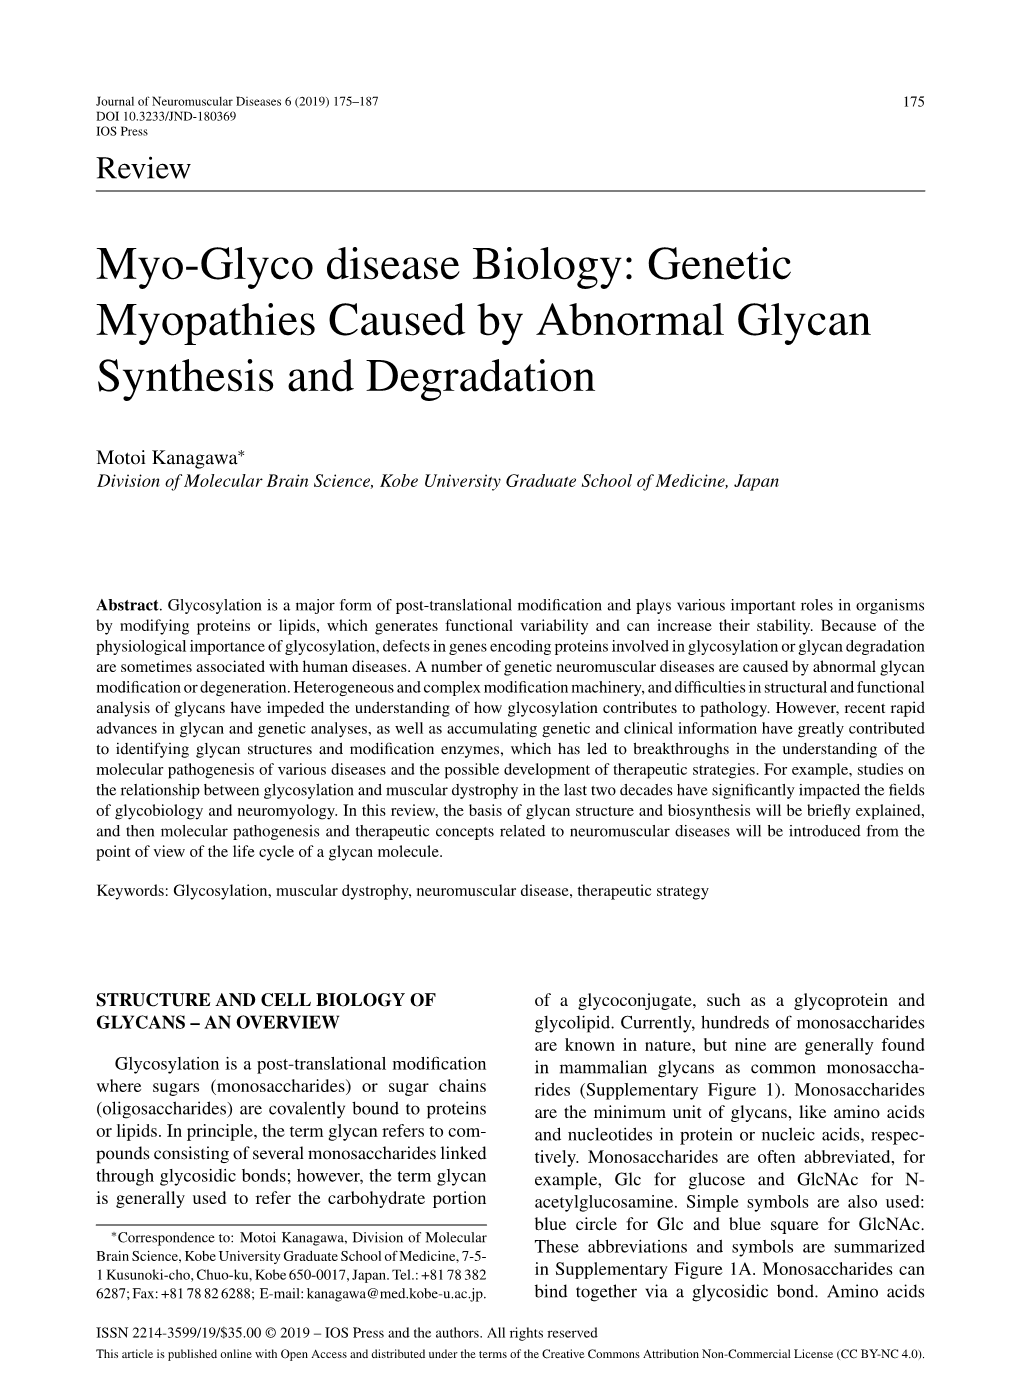 Myo-Glyco Disease Biology: Genetic Myopathies Caused by Abnormal Glycan Synthesis and Degradation